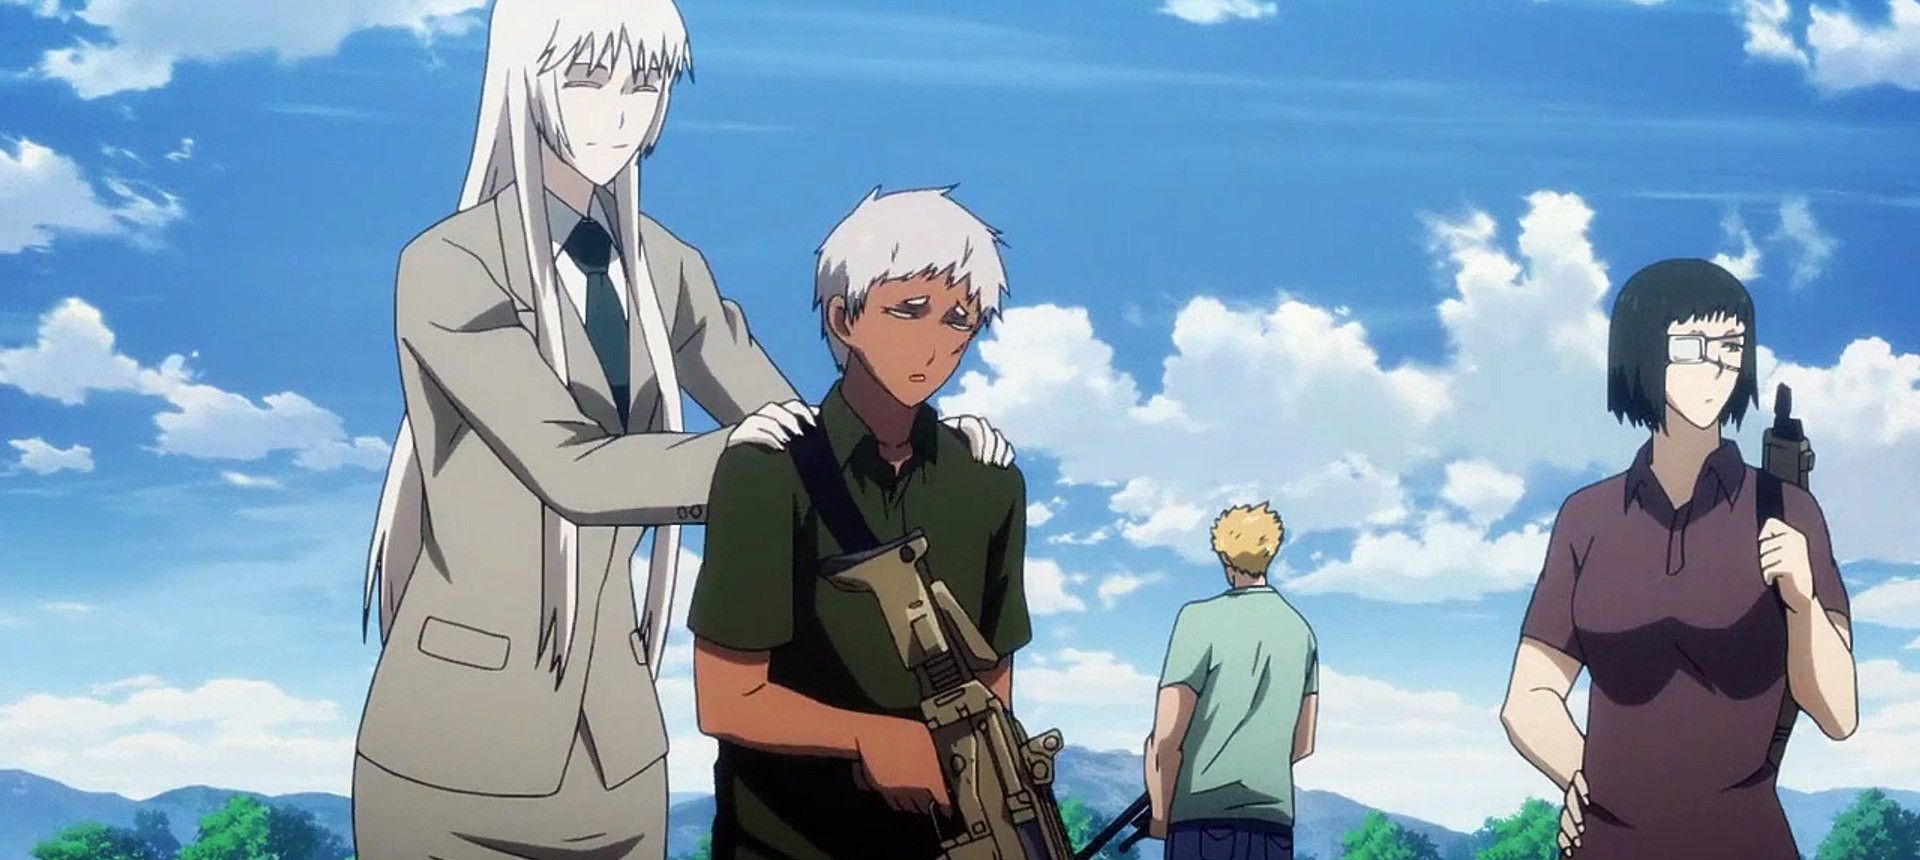 Hey Family just watched Jormungand. I know I know . Then anime came out in  2012. But I really love this show reminds me of Black lagoon . I love the  relationship